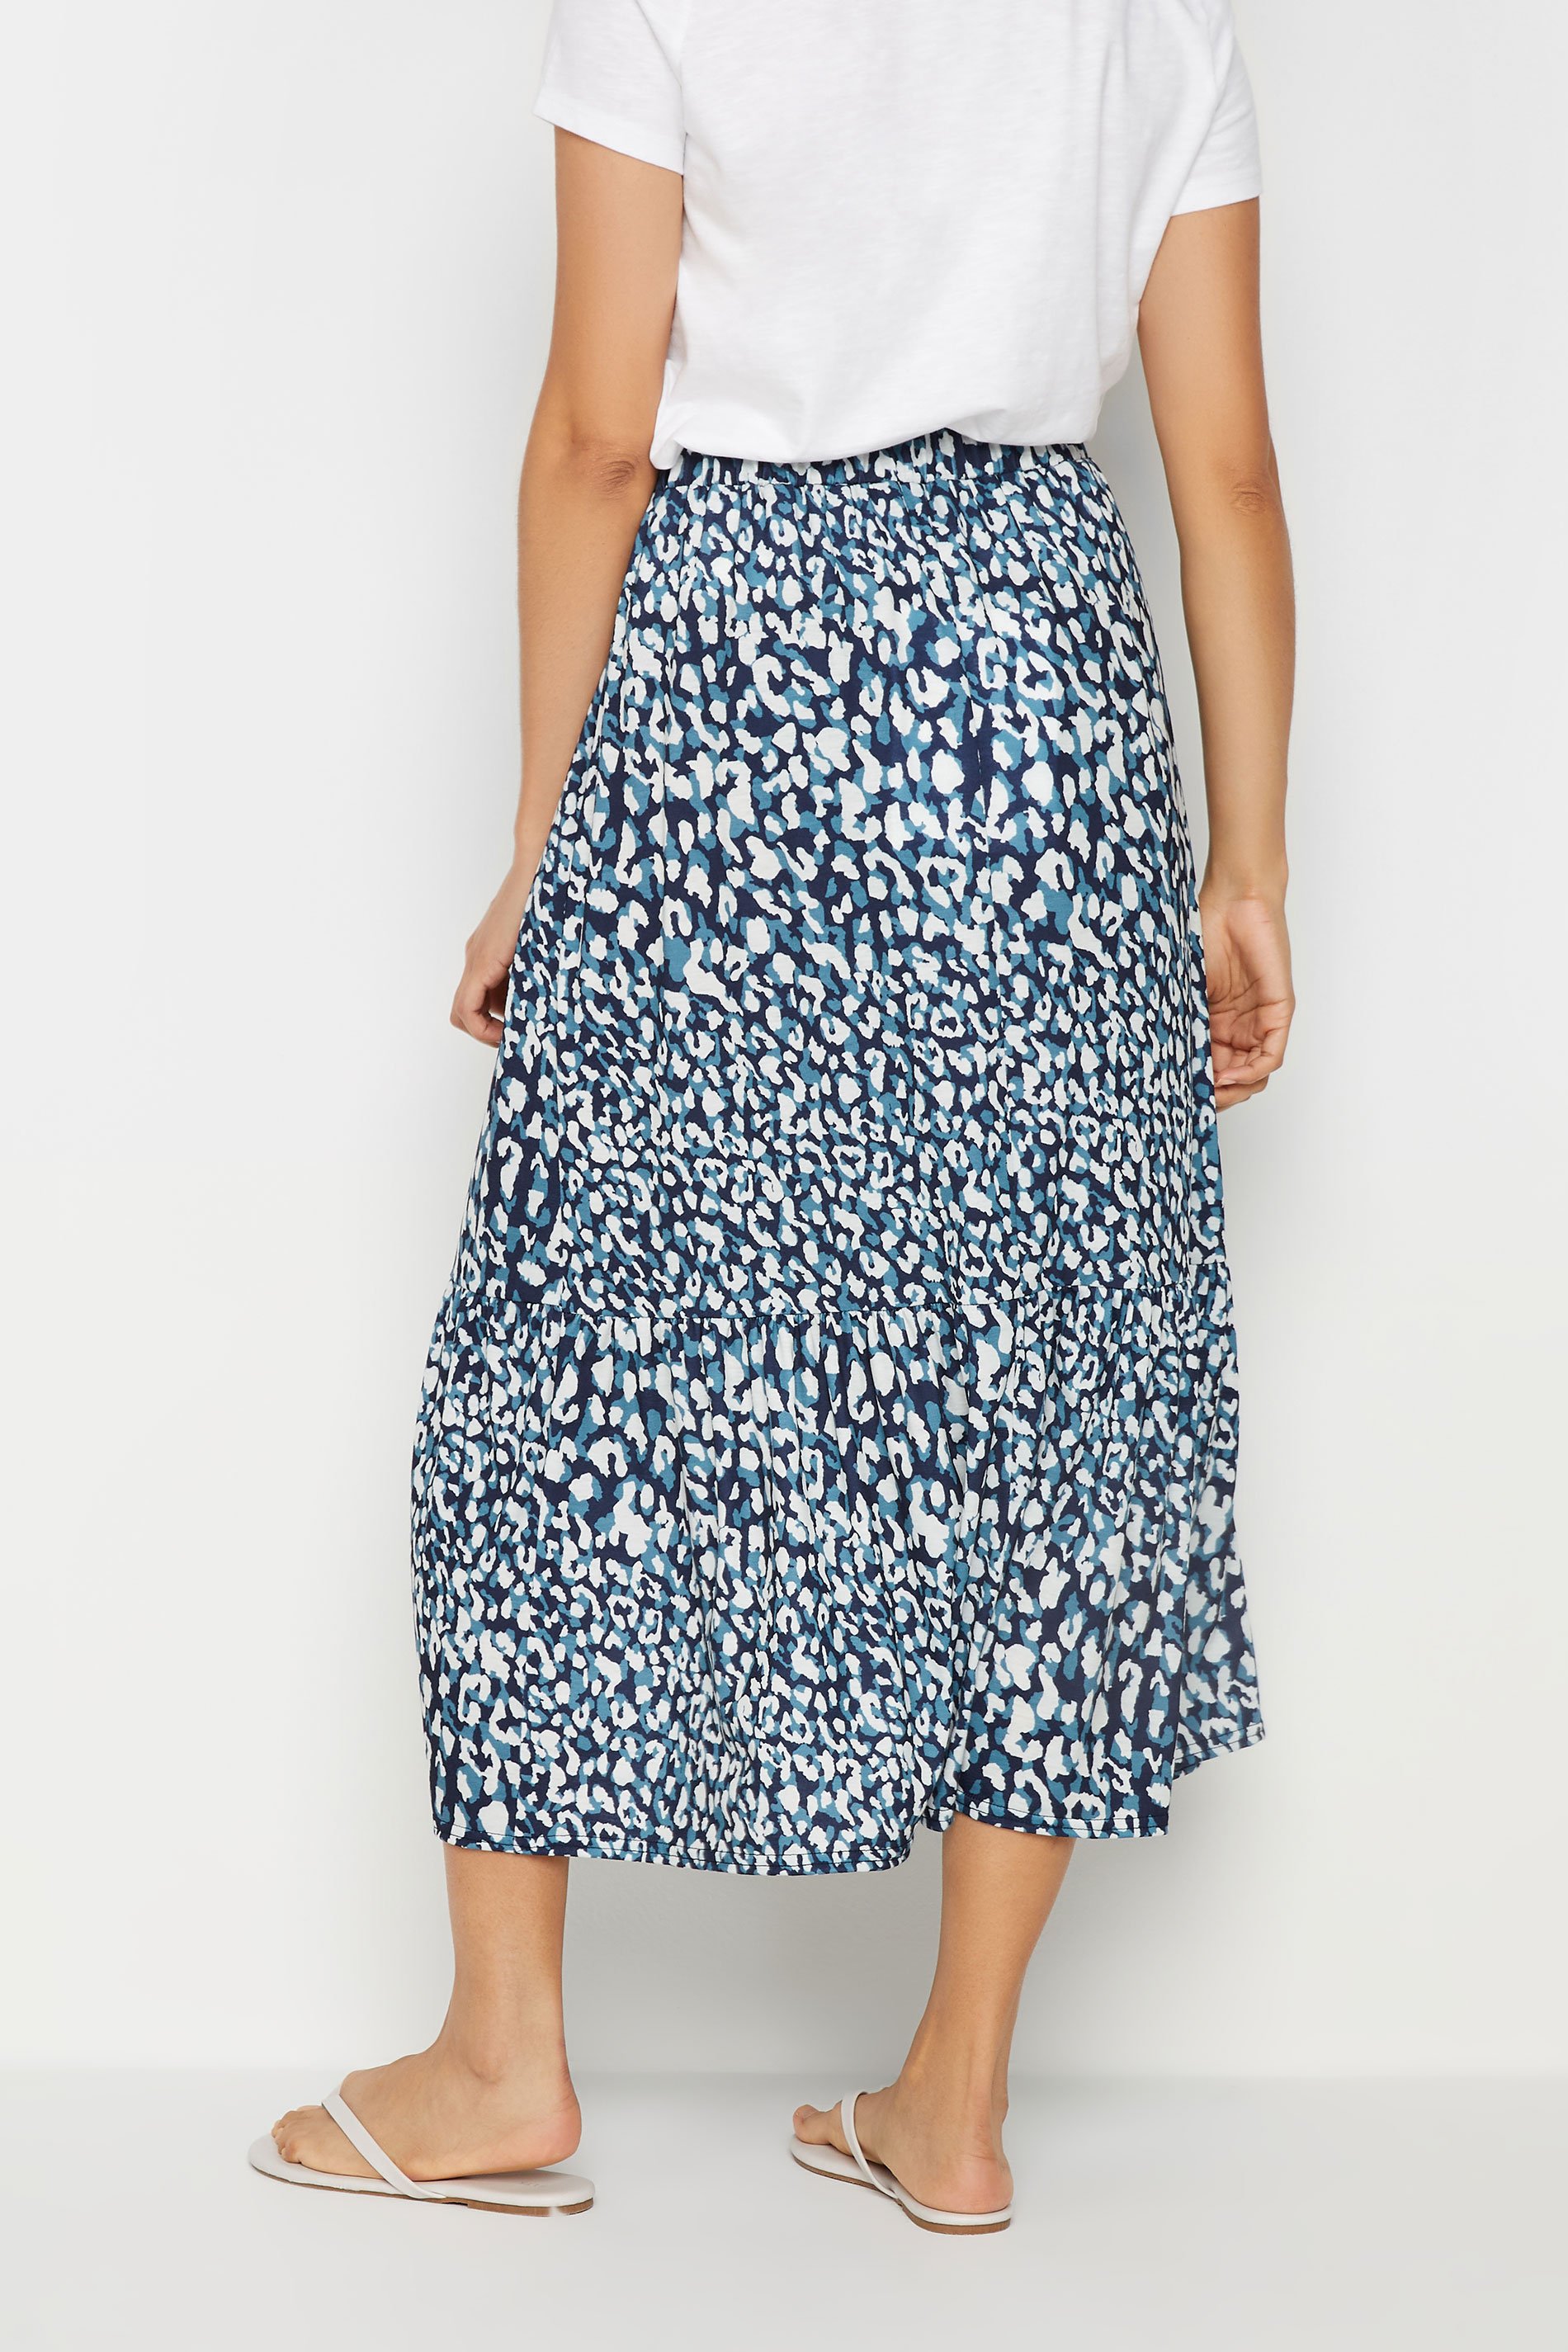 M&Co Blue Leopard Print Tiered Skirt | M&Co 3